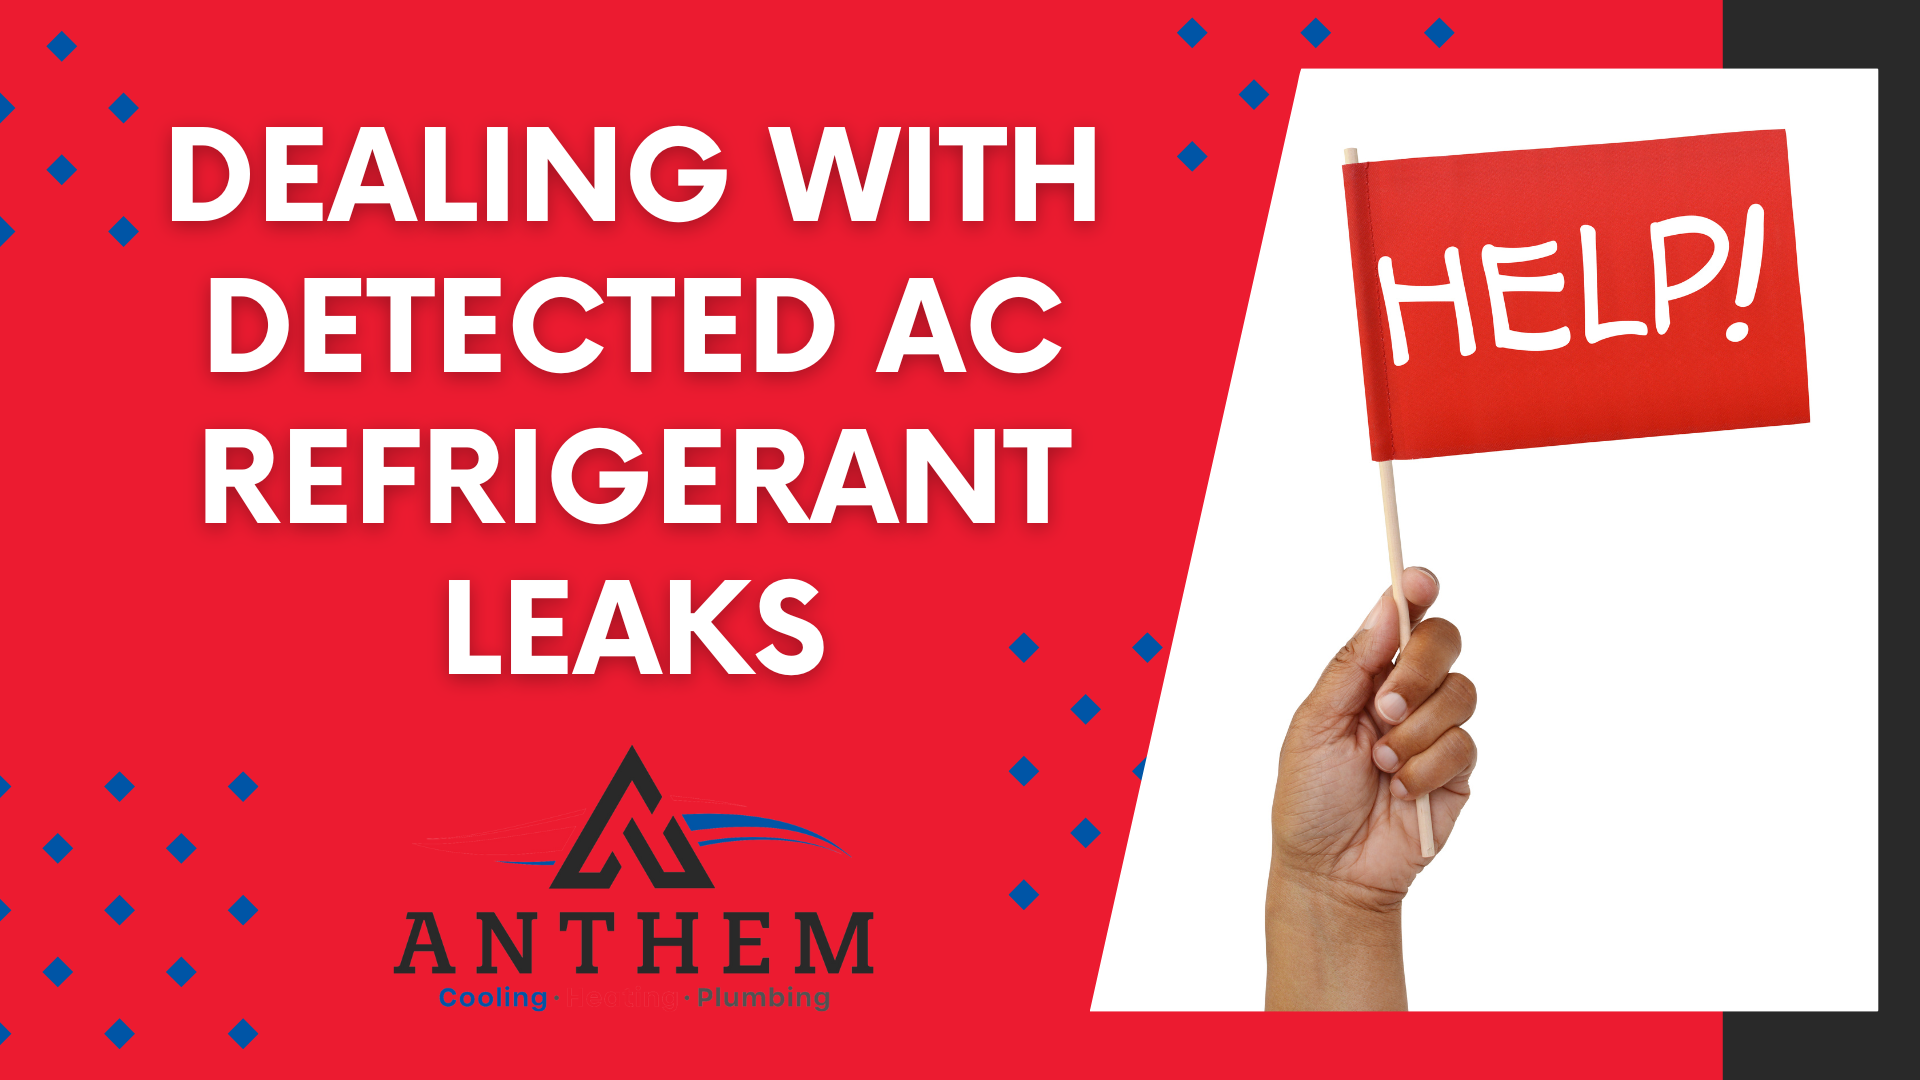 Dealing with Detected AC Refrigerant Leaks